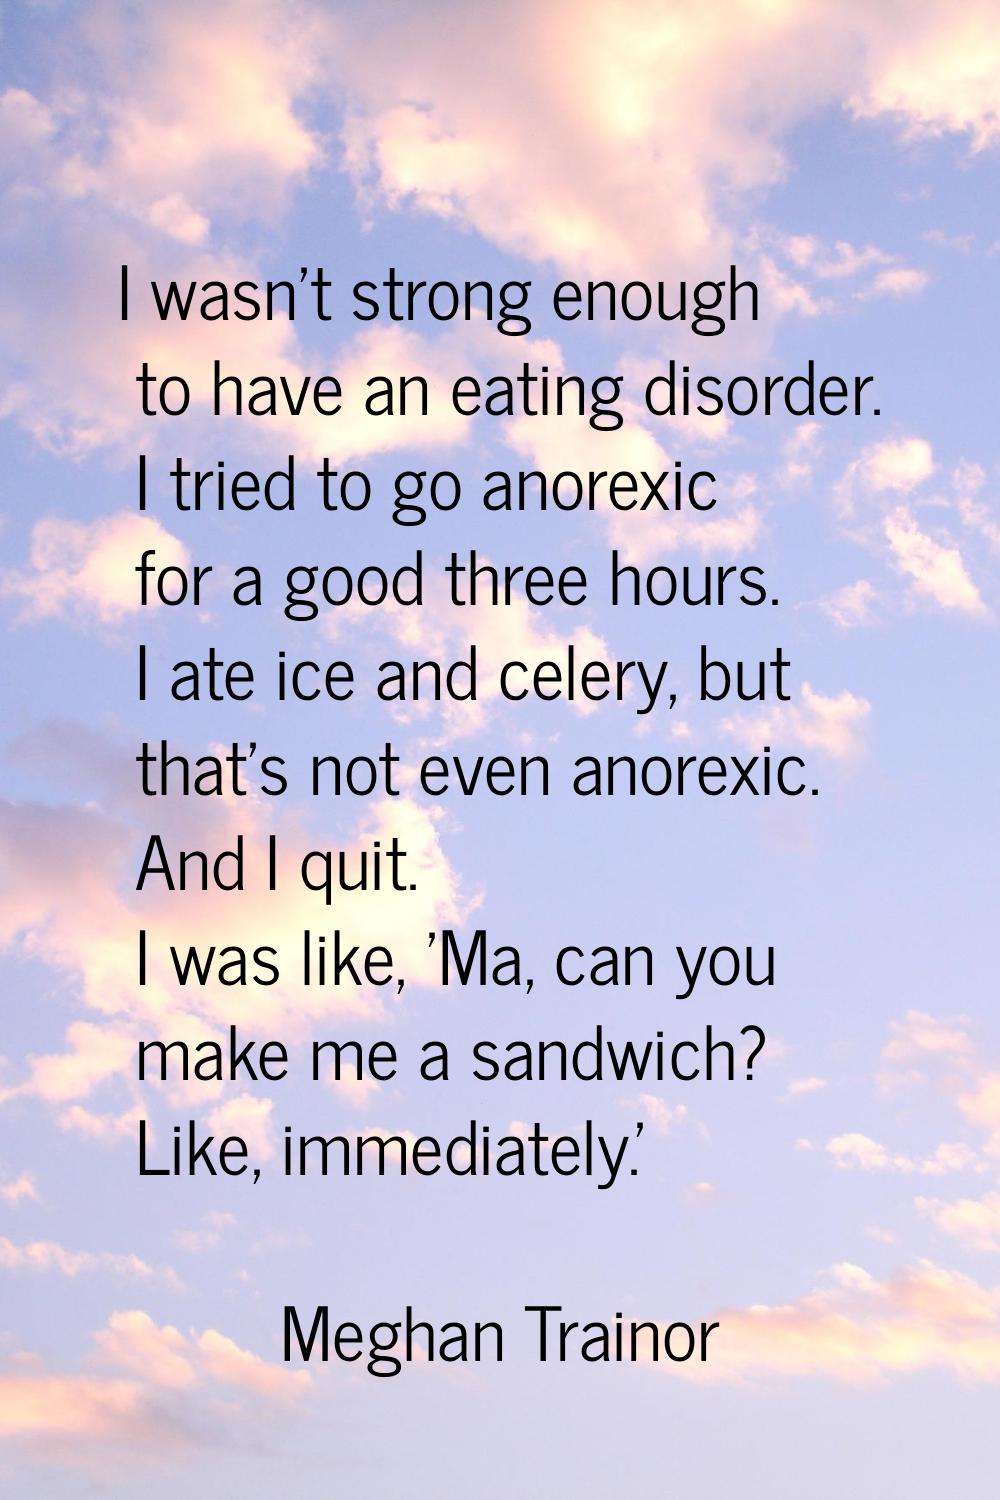 I wasn't strong enough to have an eating disorder. I tried to go anorexic for a good three hours. I